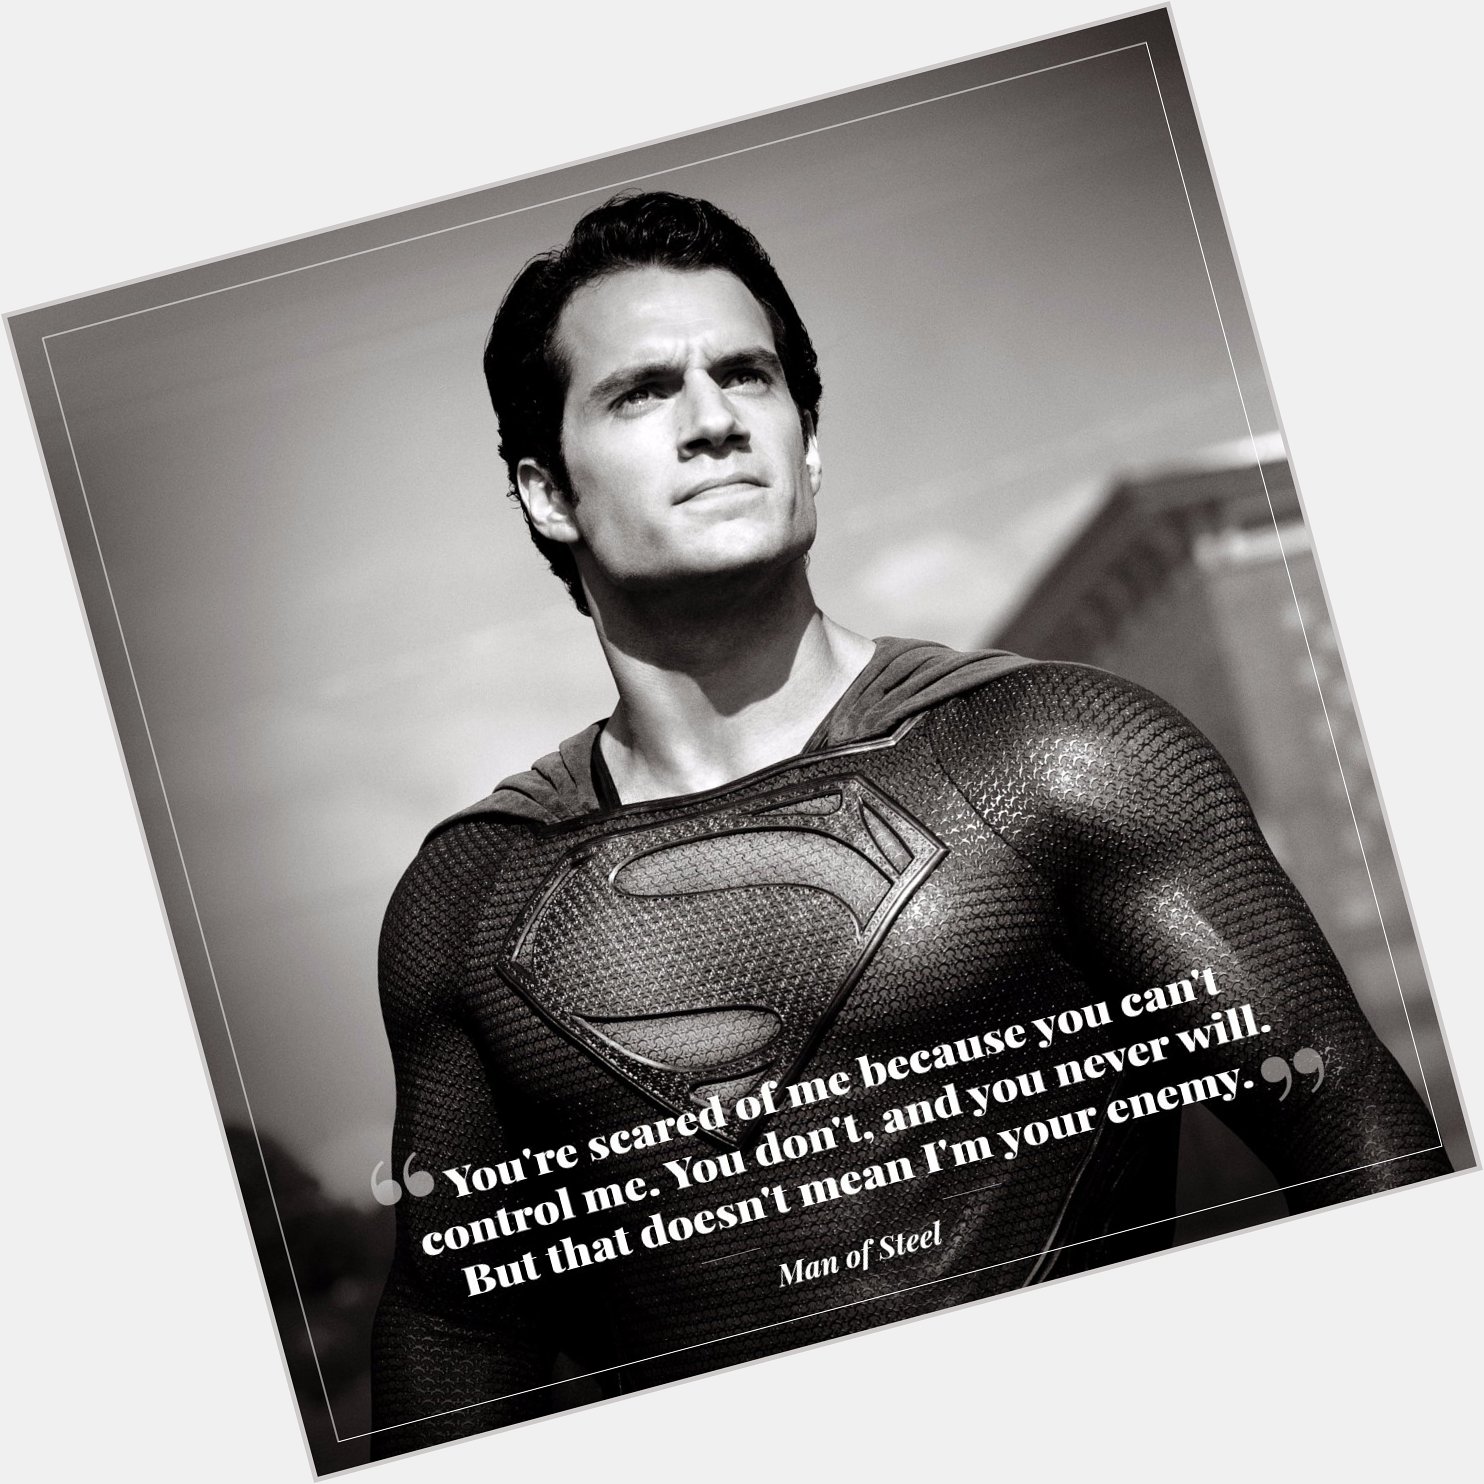 Happy birthday to our Man of Steel, Henry Cavill. 